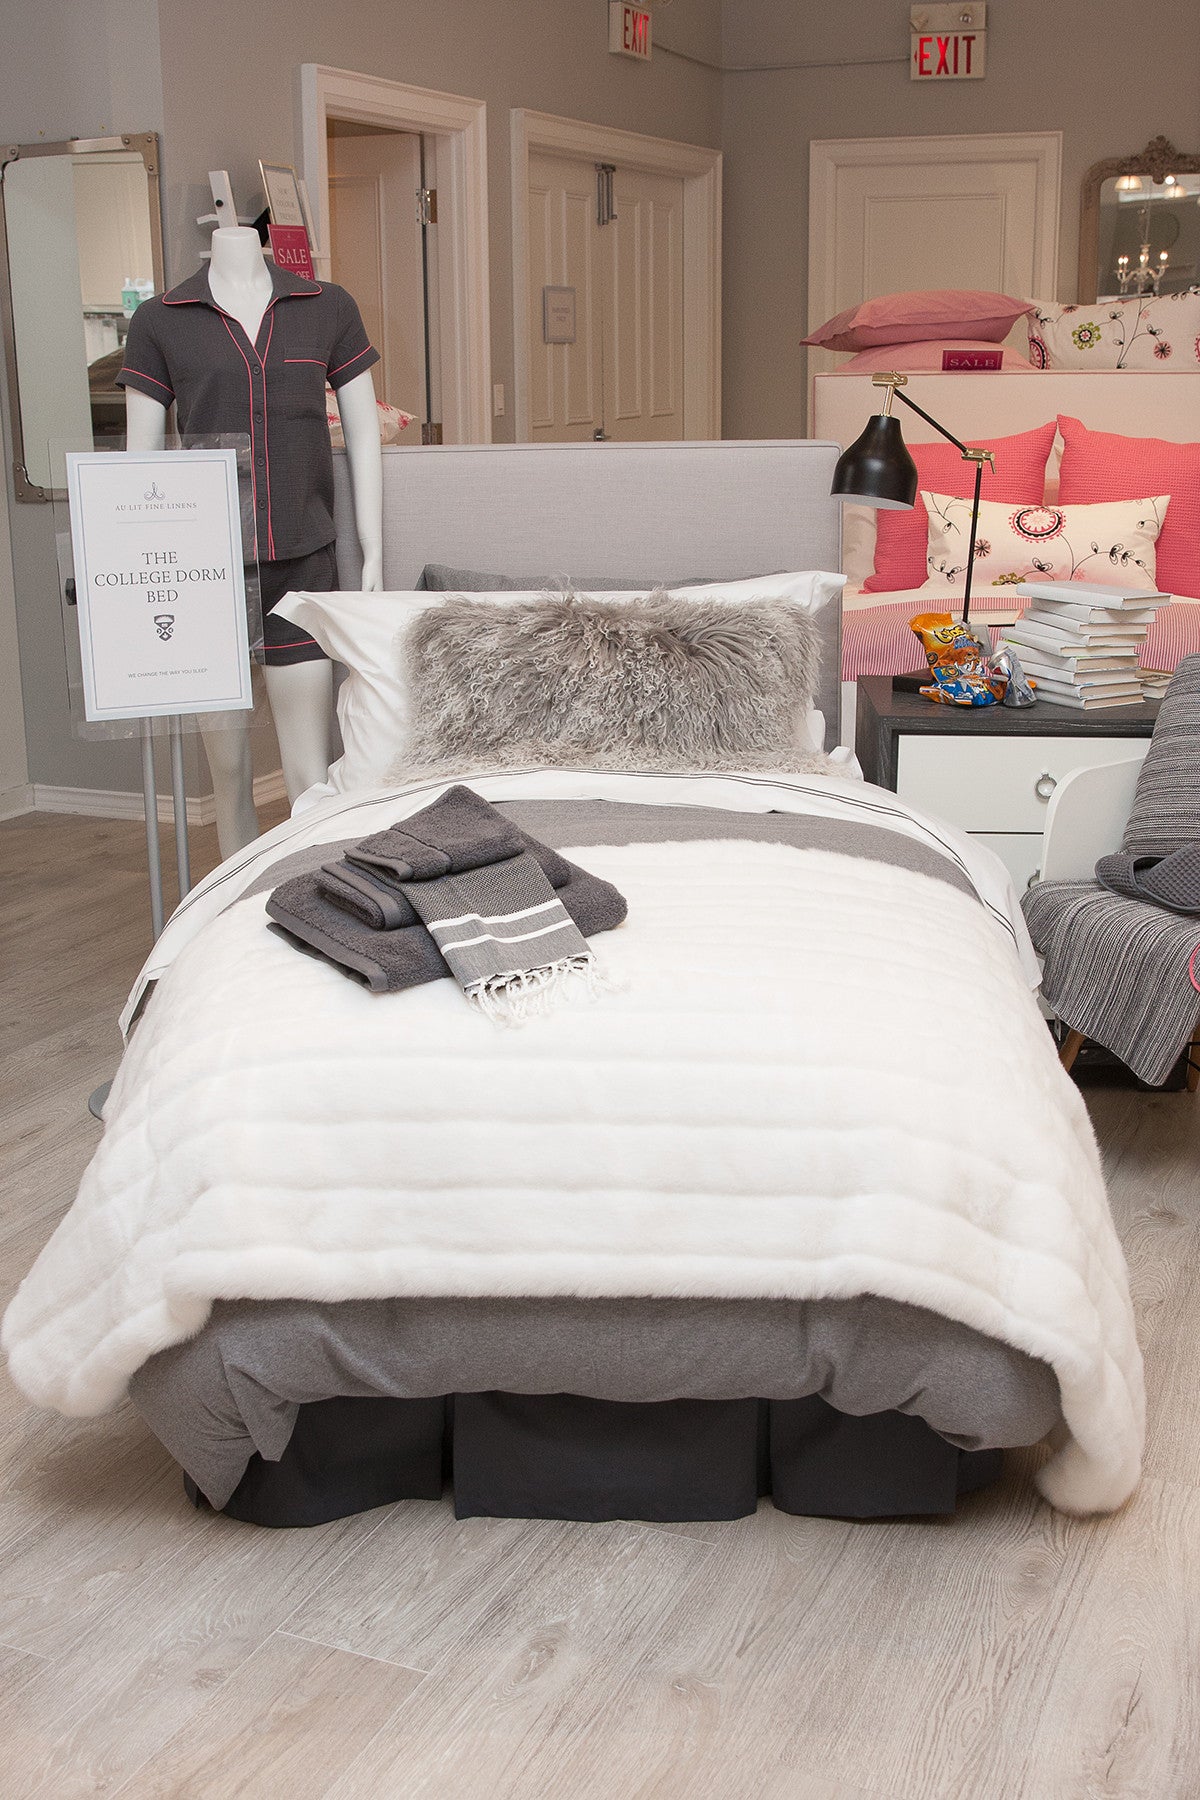 5 Must-Haves for your Dorm Room Bed